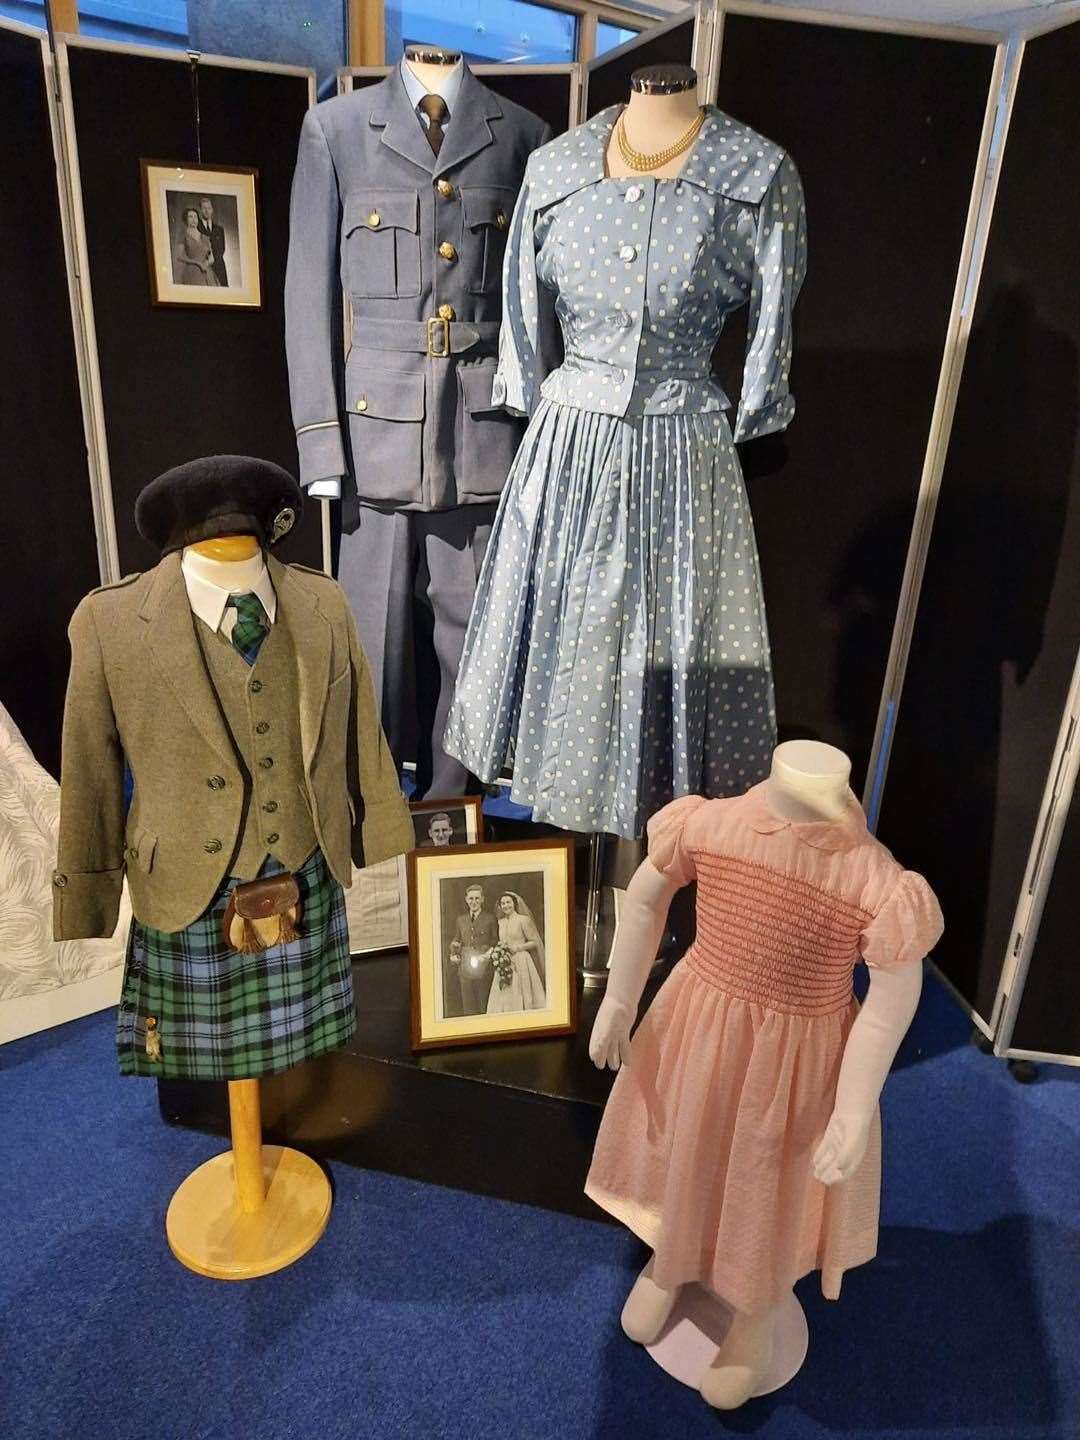 The Garioch Heriage Centre is currently running an exhibition looking at 100 years of fashion.